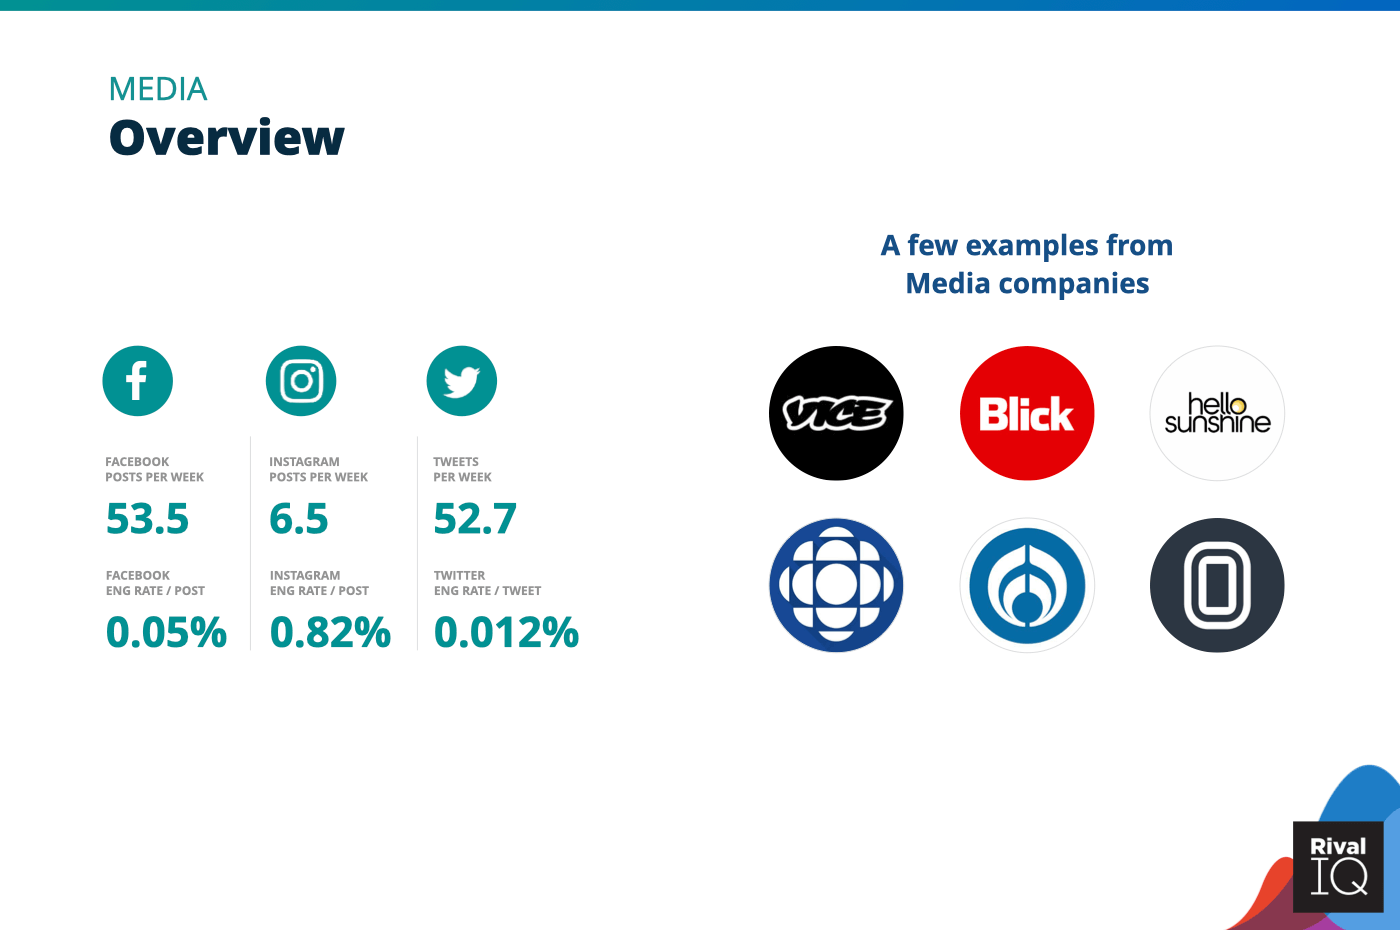 Overview of all benchmarks, Media